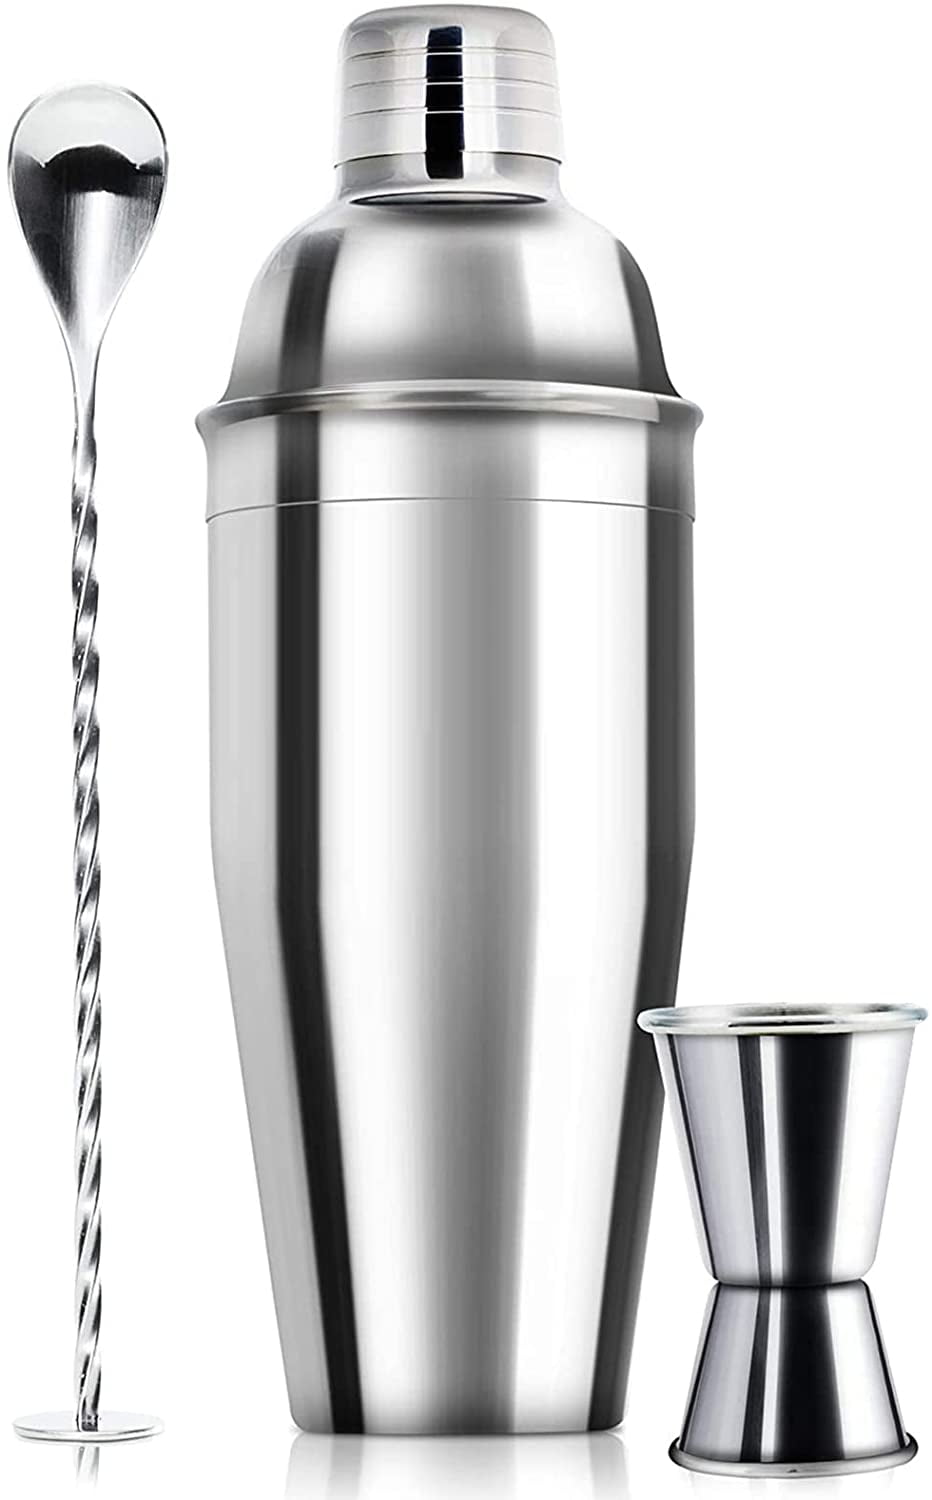 Cobbler Style Cocktail Shaker Set with Jigger in Stainless Steel; Home or Bar Bartender Kit with 24oz Shaker Cup and Cocktail Strainer; Professional Grade Bar Accessories Drink Mixer 